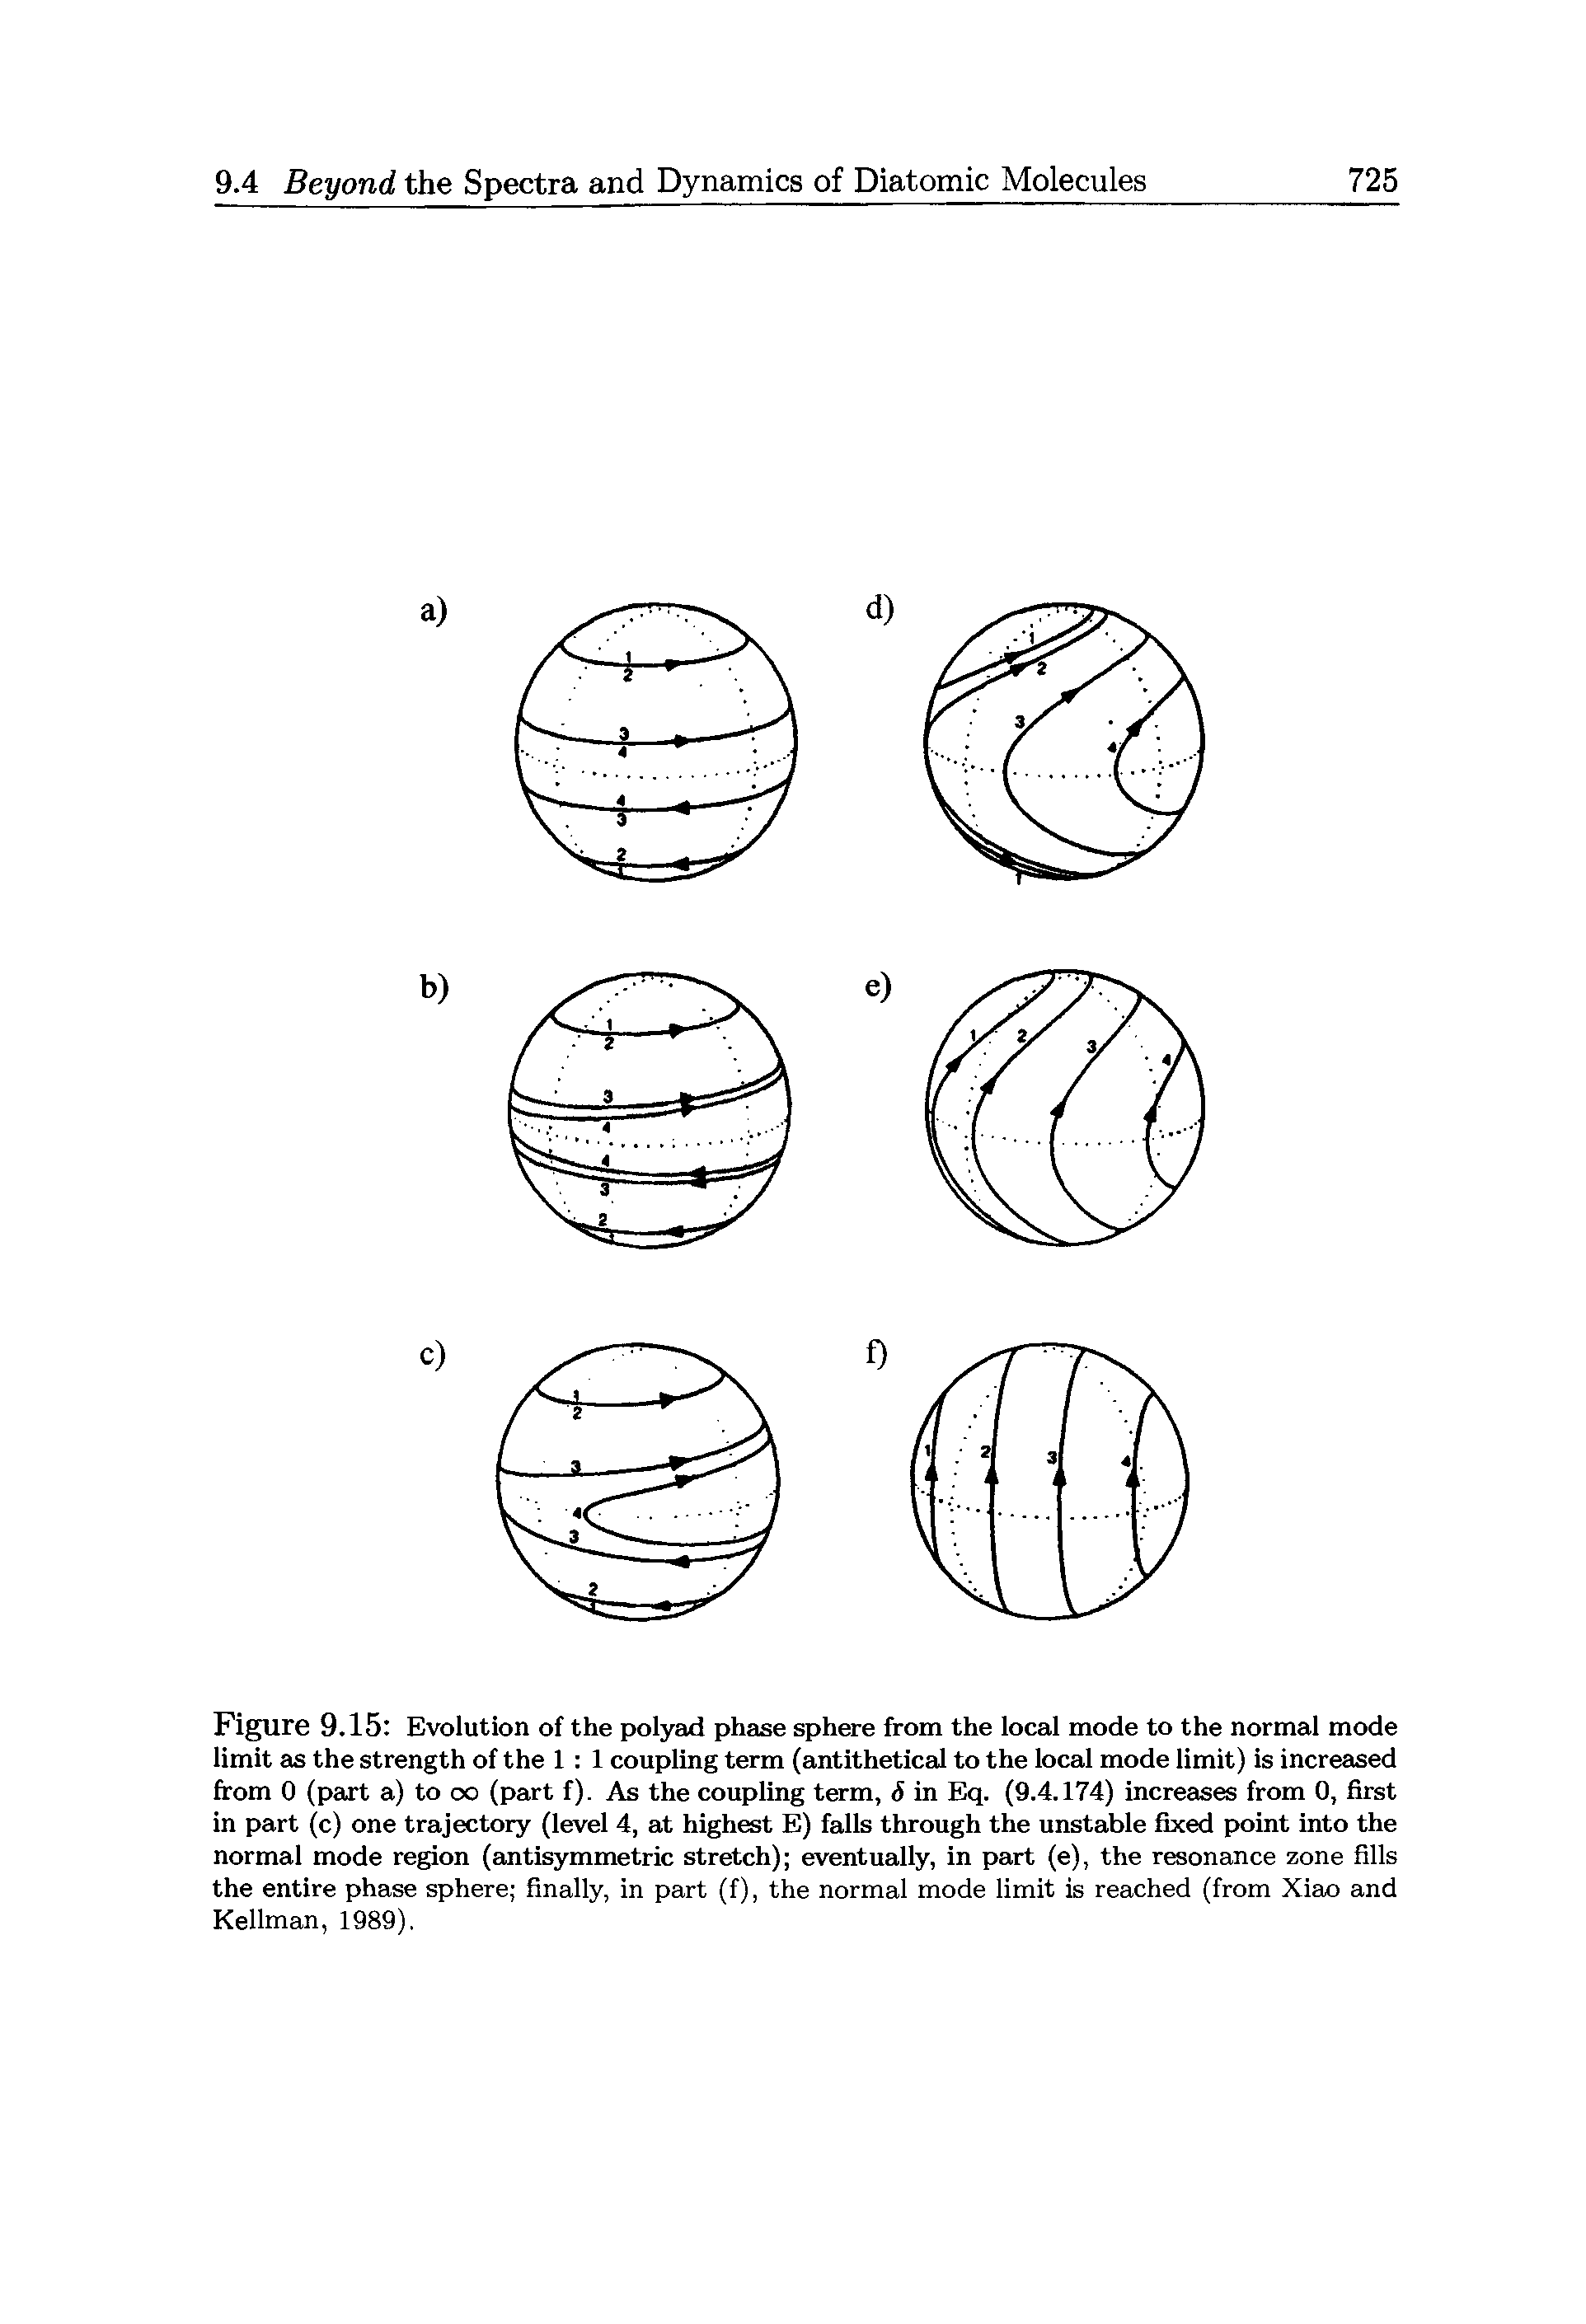 Figure 9.15 Evolution of the polyad phase sphere from the local mode to the normal mode limit as the strength of the 1 1 coupling term (antithetical to the local mode limit) is increased from 0 (part a) to oo (part f). As the coupling term, <5 in Eq. (9.4.174) increases from 0, first in part (c) one trajectory (level 4, at highest E) falls through the unstable fixed point into the normal mode region (antisymmetric stretch) eventually, in part (e), the resonance zone fills the entire phase sphere finally, in part (f), the normal mode limit is reached (from Xiao and Kellman, 1989).